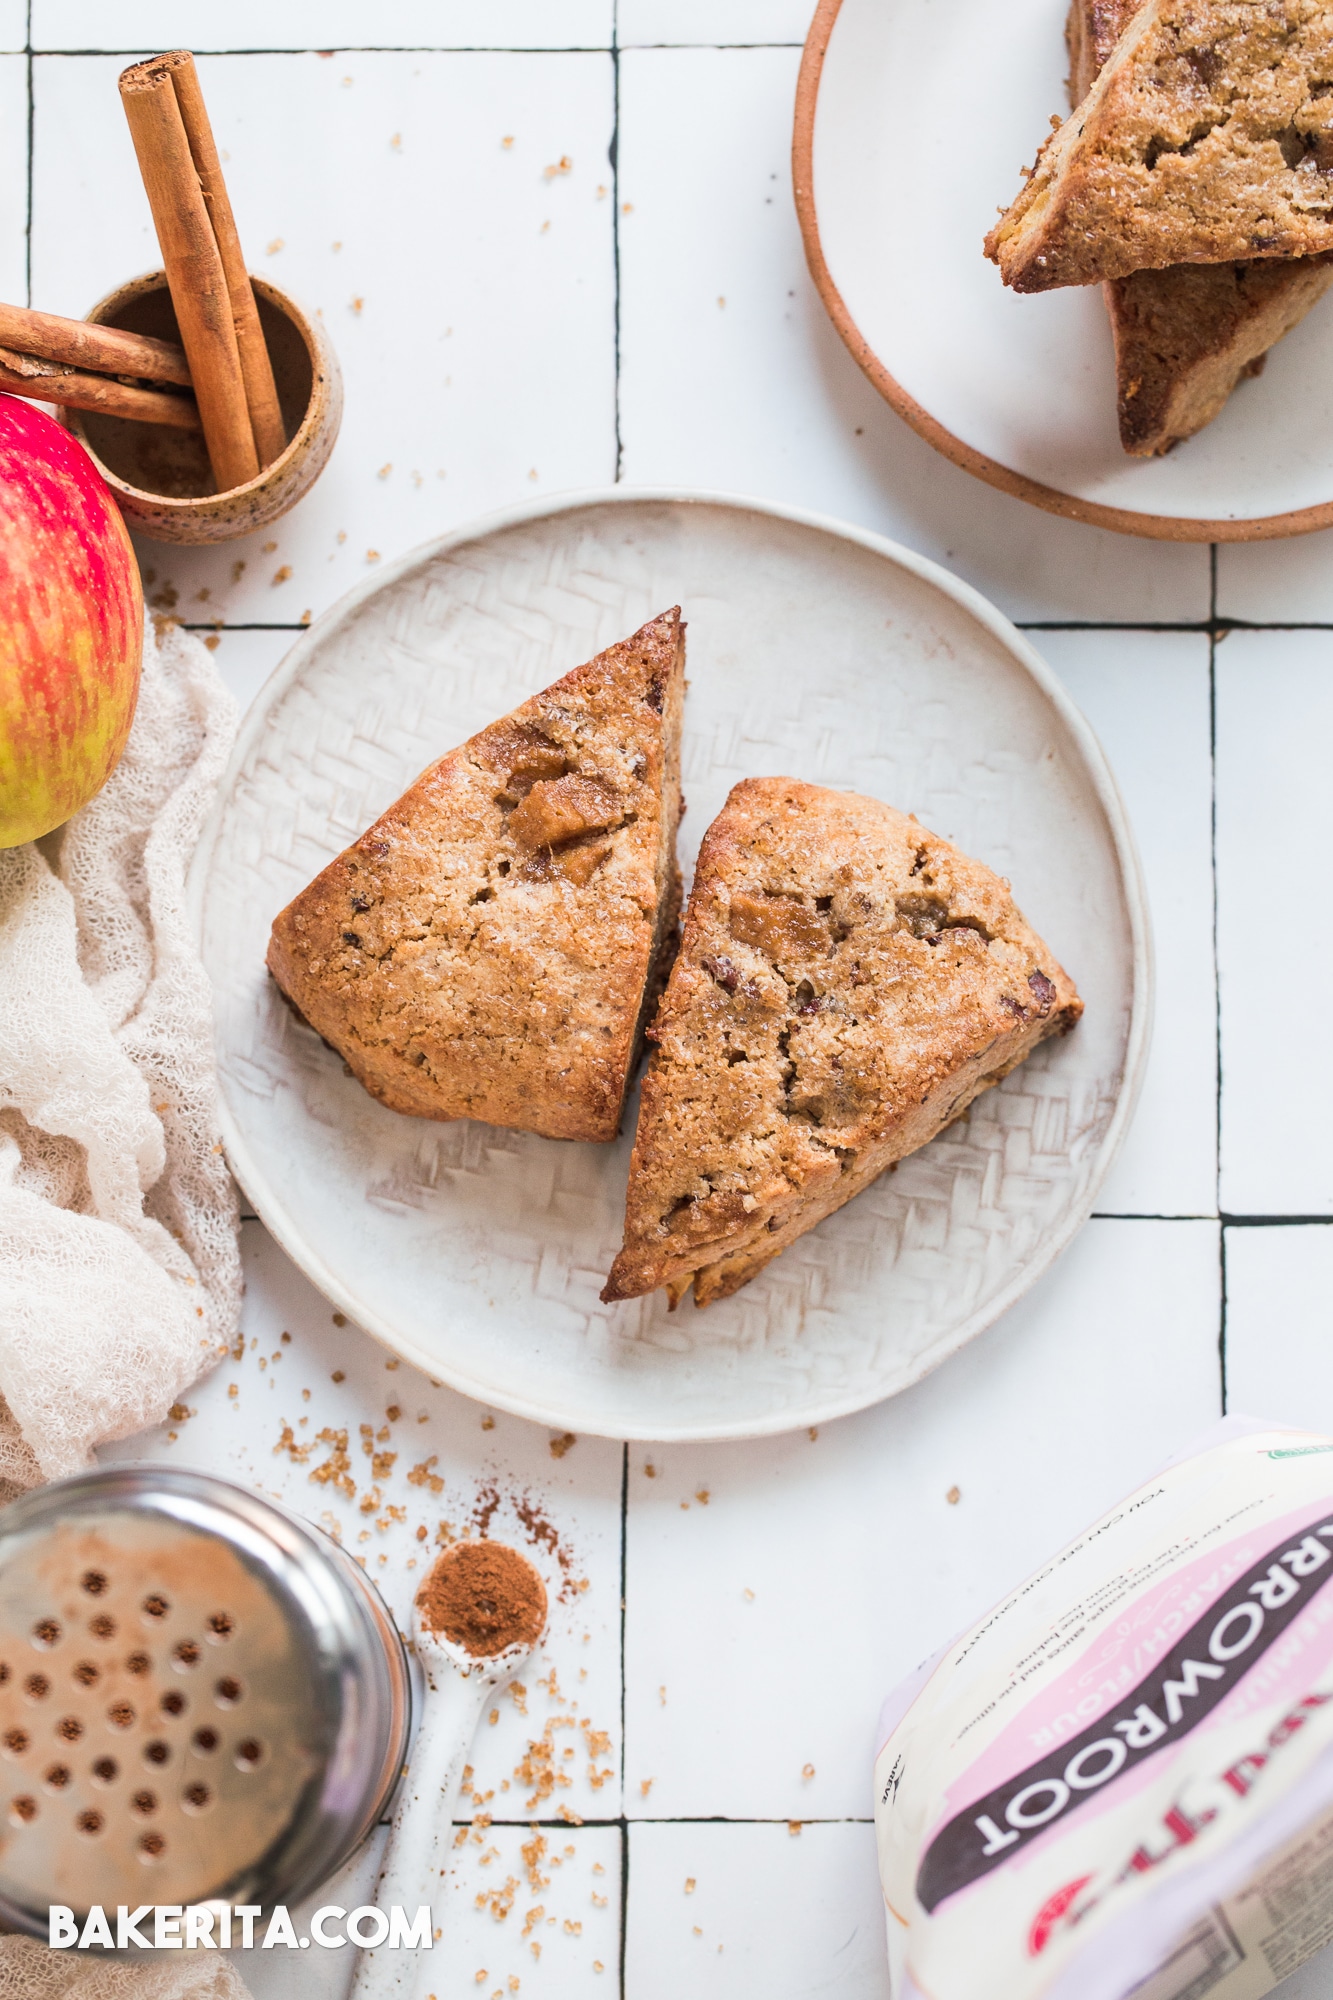 Meet your new fall favorite: these Gluten-Free Vegan Apple Cinnamon Scones are tender, flavorful, and simply irresistible. Made with caramelised apples and toasted pecans, the dough for these simple scones comes together easily.